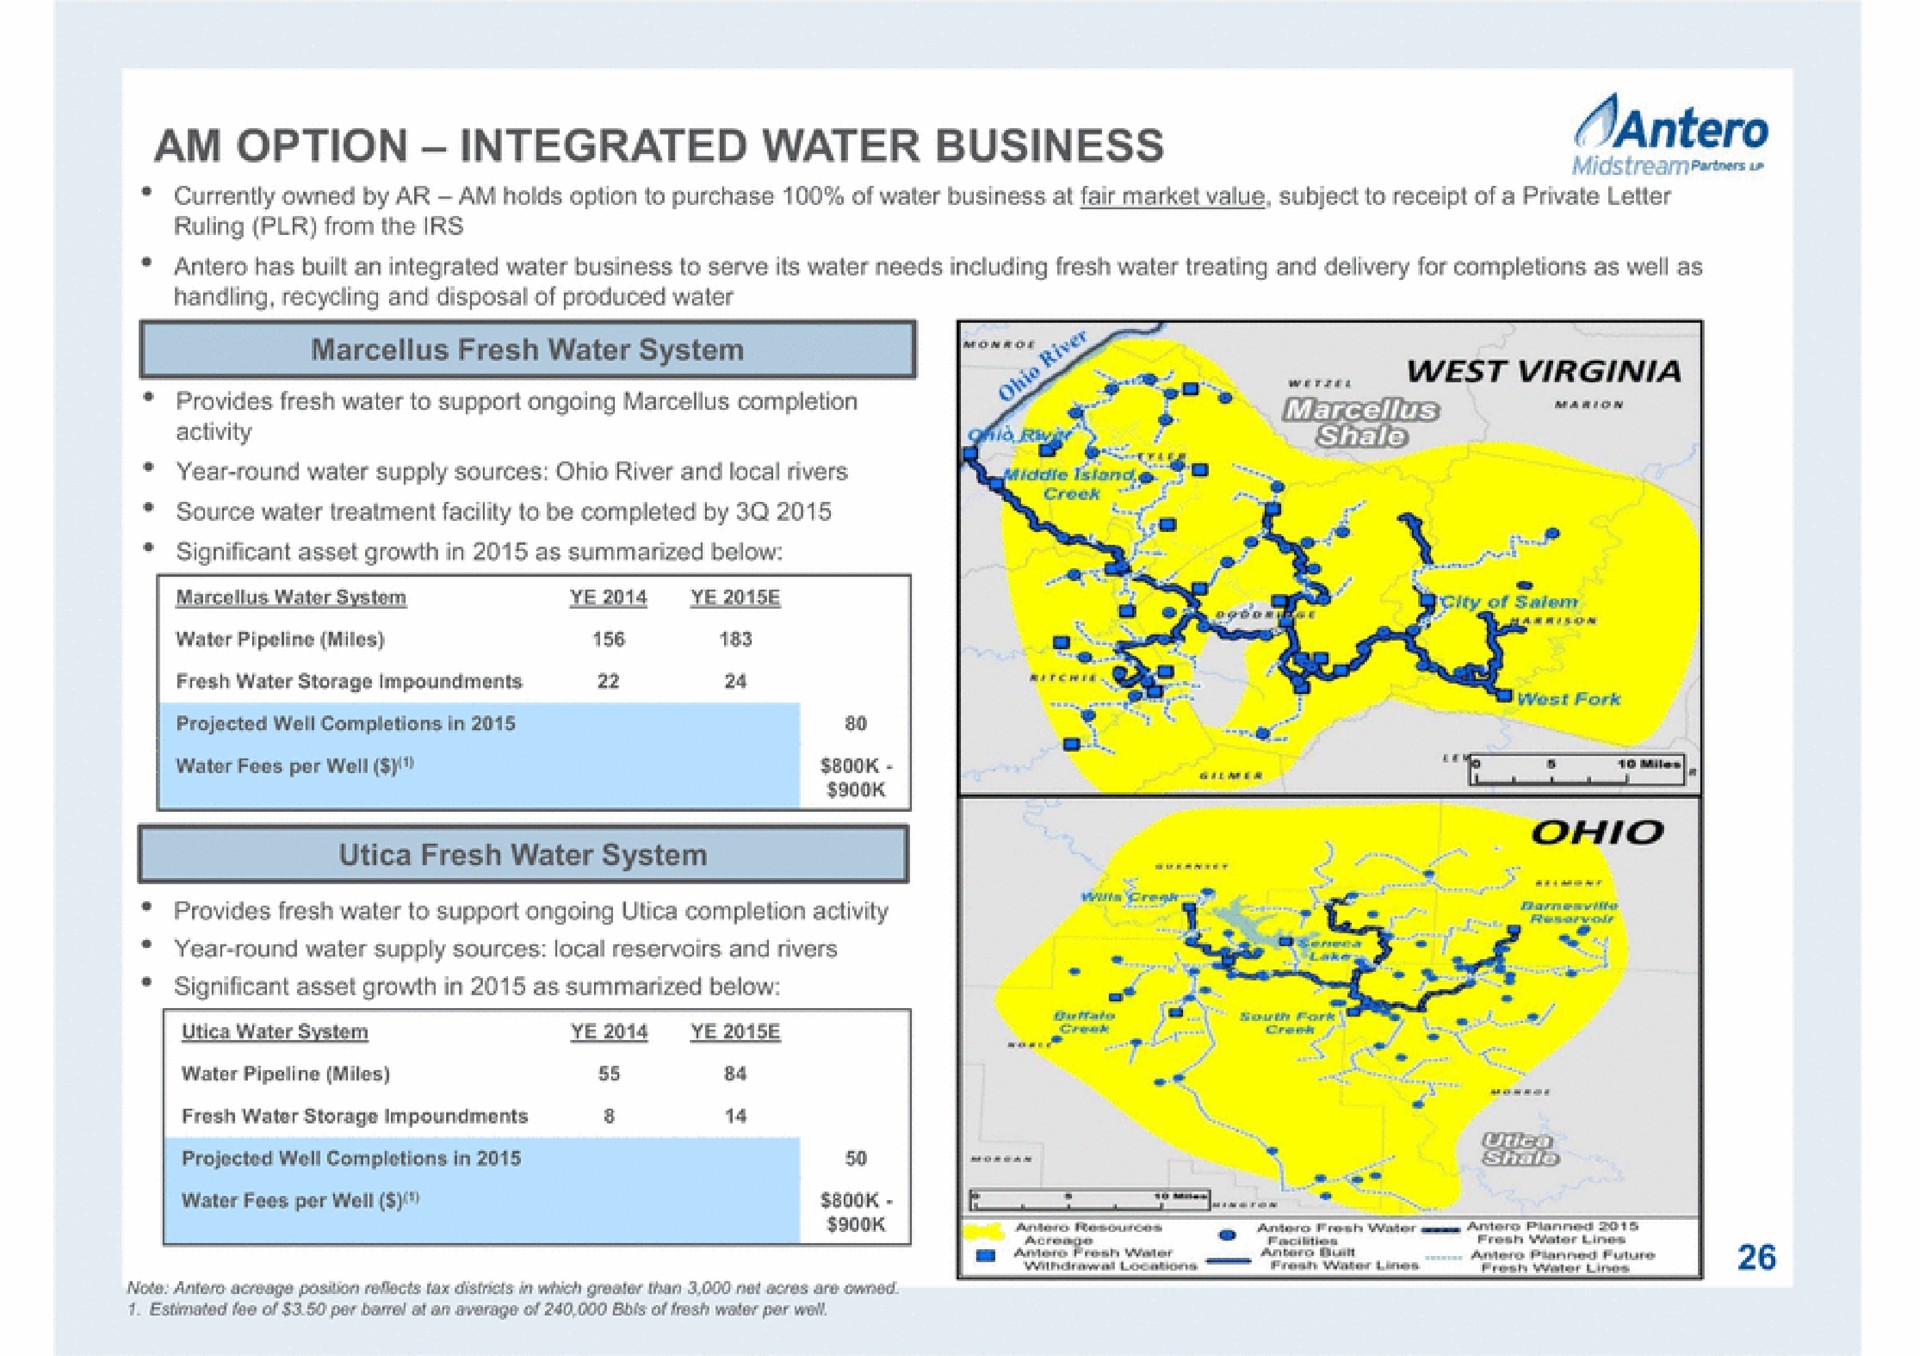 am option integrated water business | Antero Midstream Partners